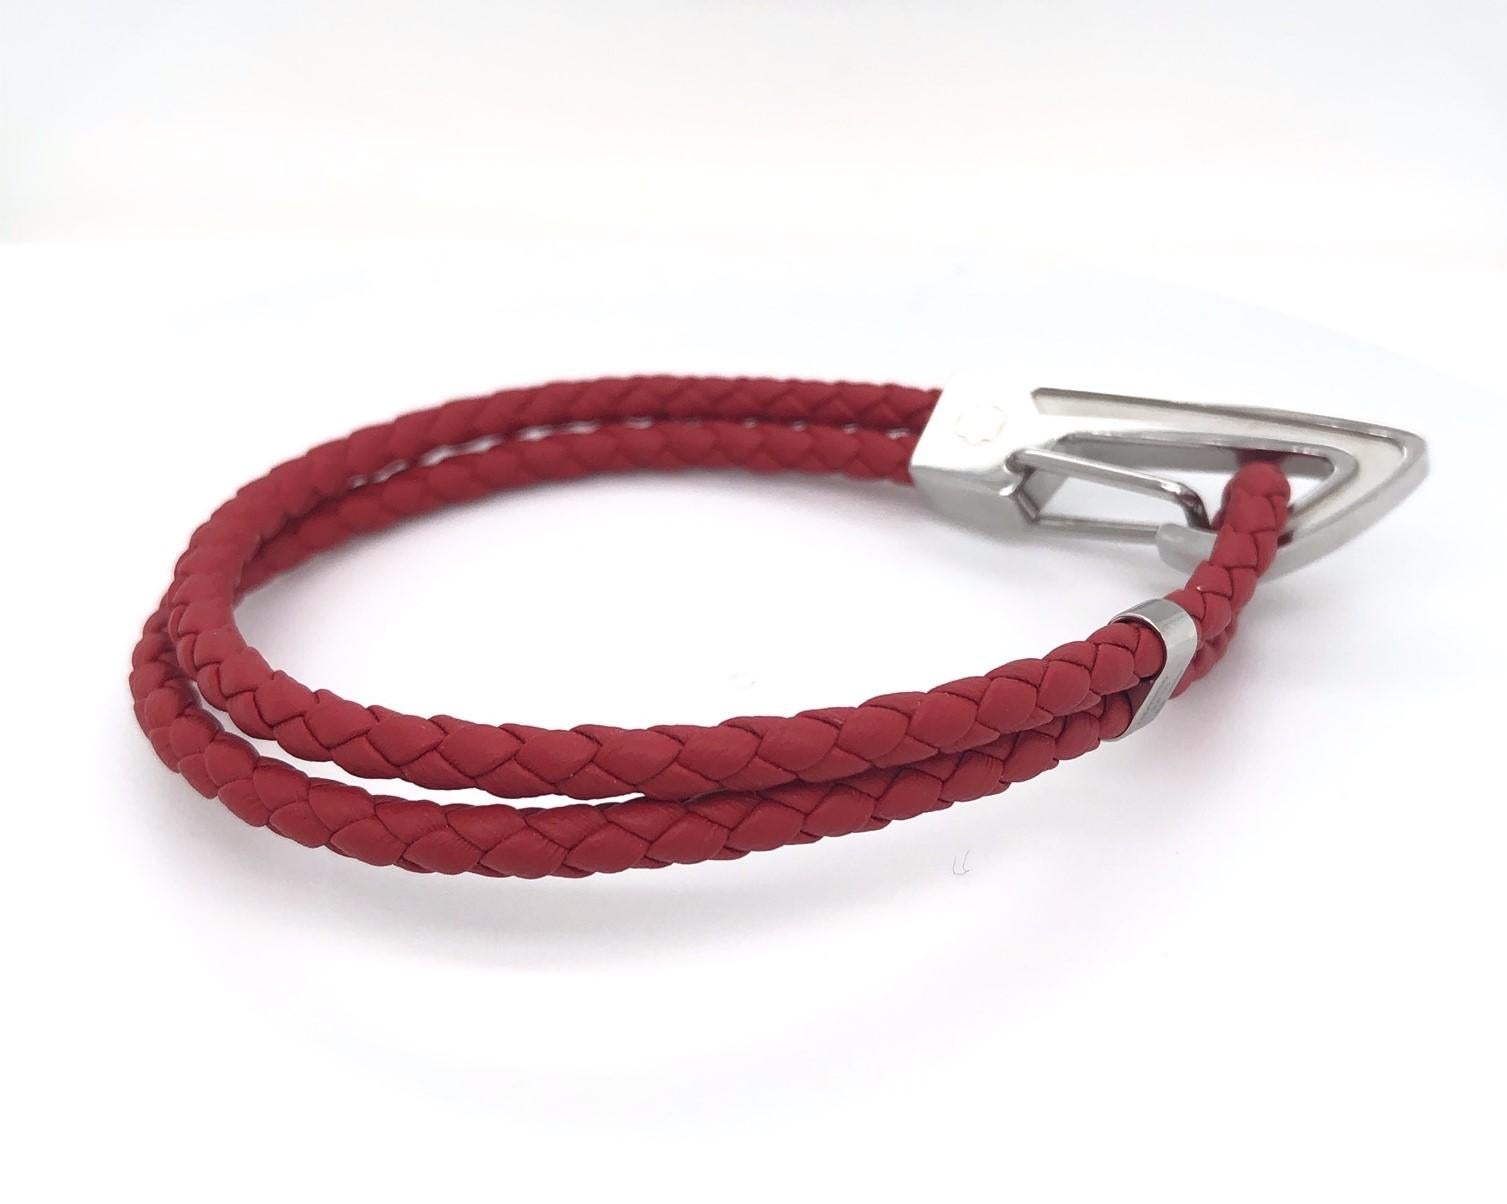 Montblanc Mens Red Woven Bracelet. This bracelet has a polished stainless steel carabiner closure. Size medium.